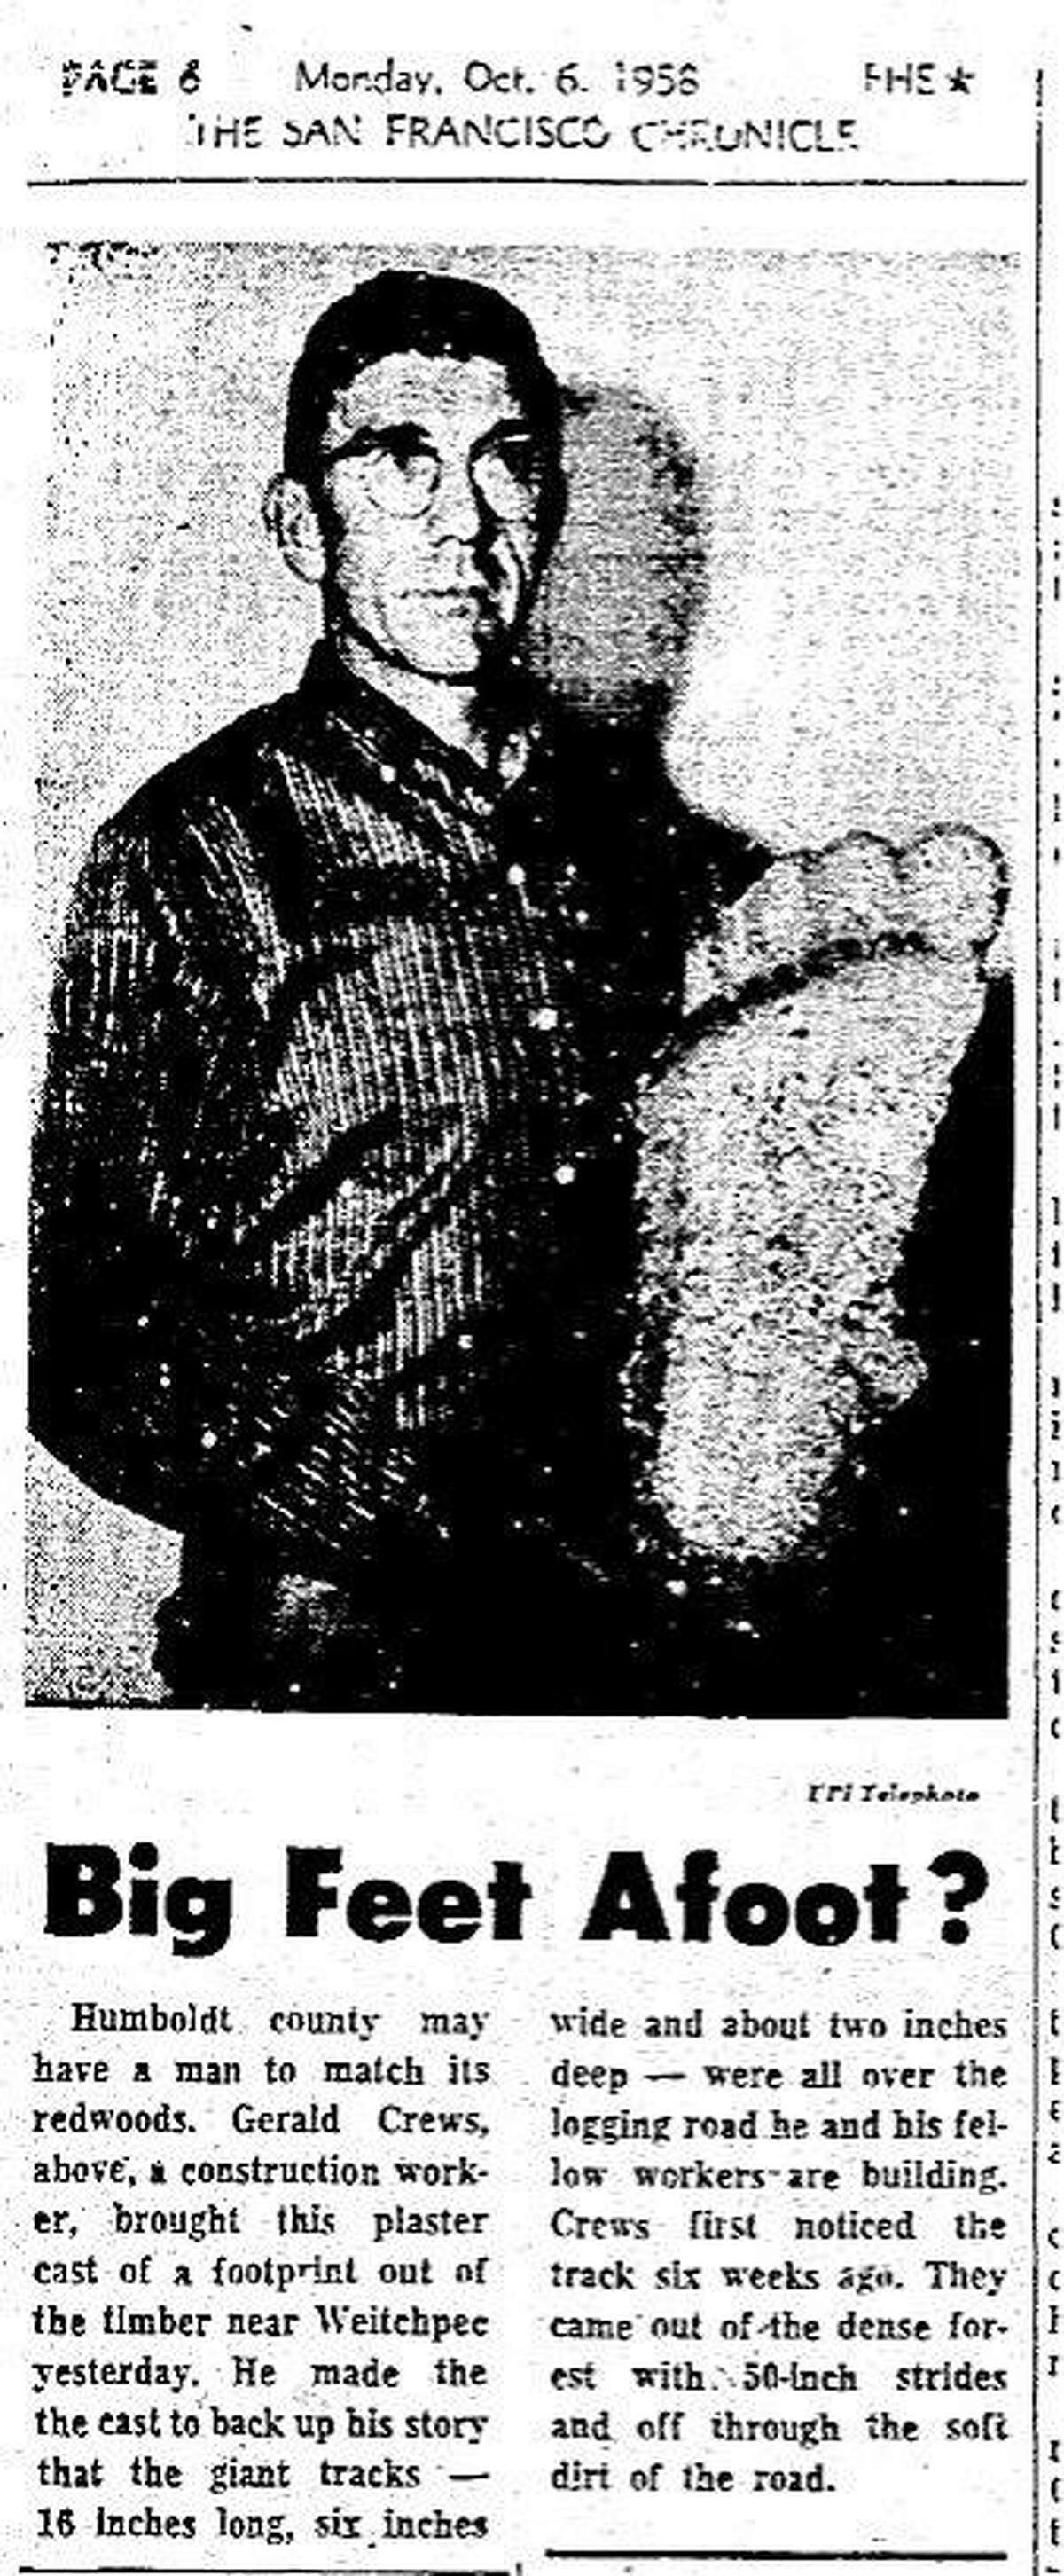 The first Chronicle article dated October 6, 1958 I found in the concerning giant footprints in Northern California. Gerald Crews, concerned he wouldn't be believed, took a plaster cast of it.